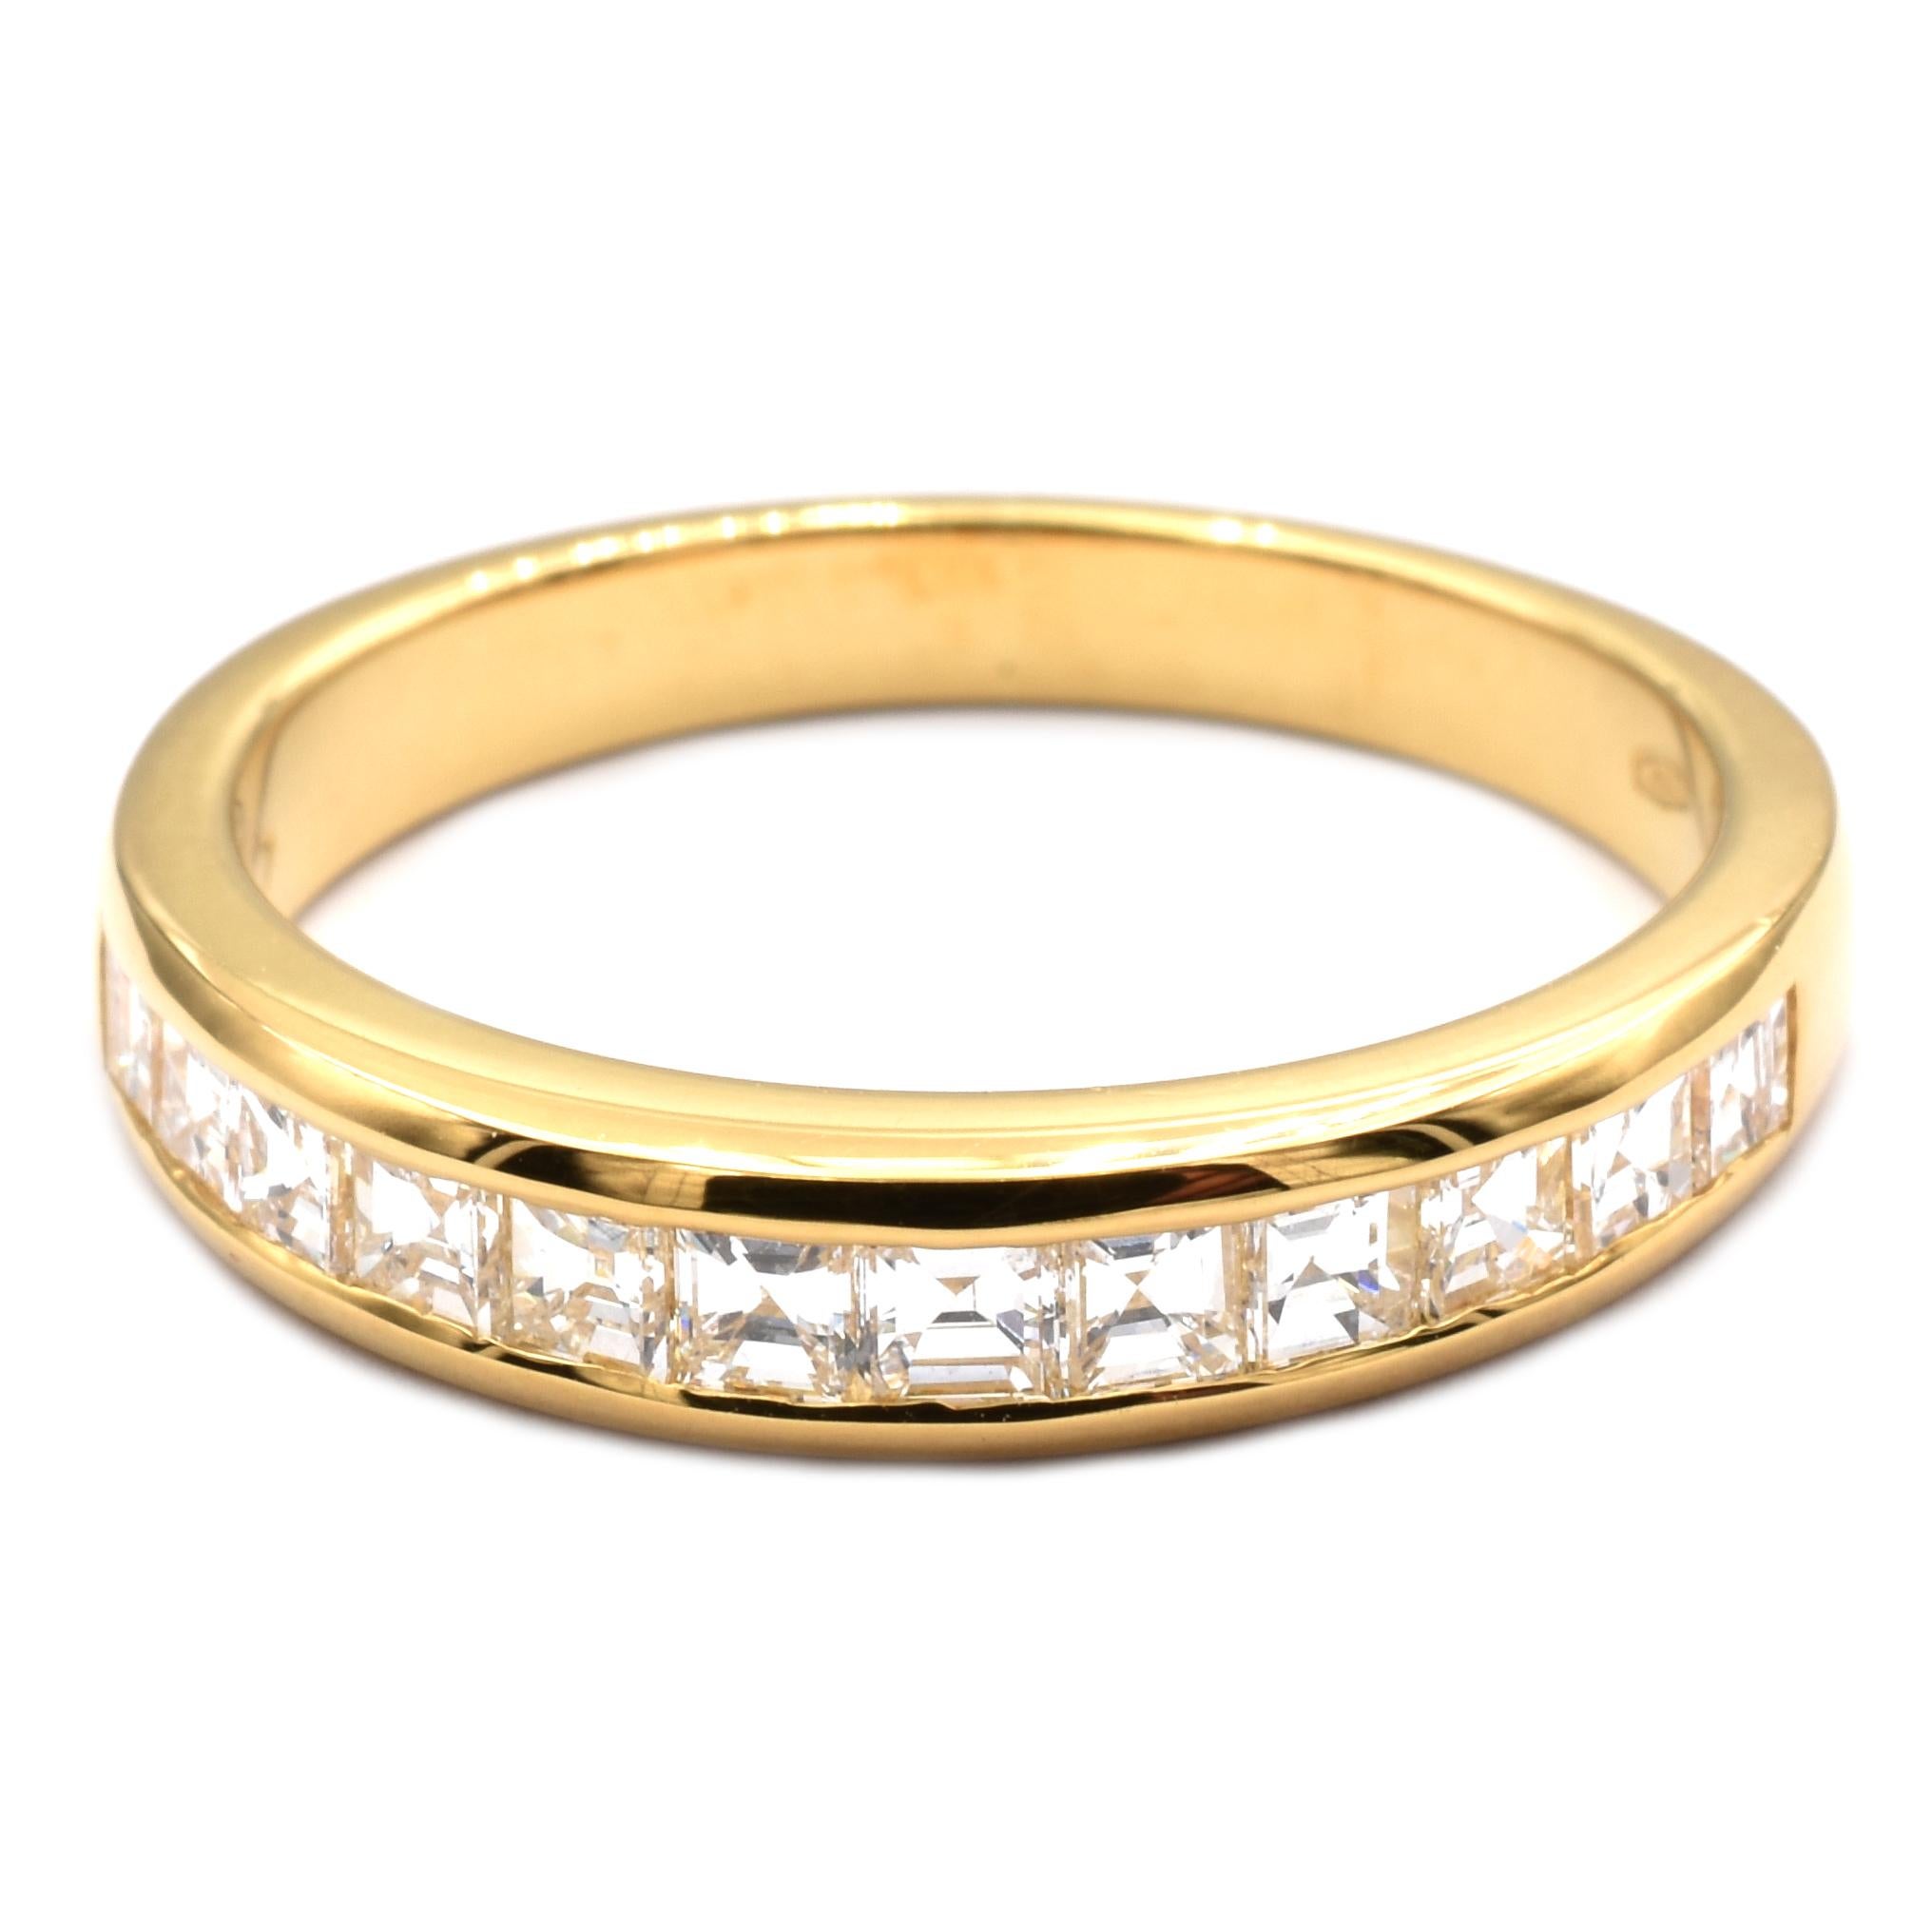 Gilberto Cassola Square Cut Diamonds Yellow Gold Ring Made in Italy For Sale 3